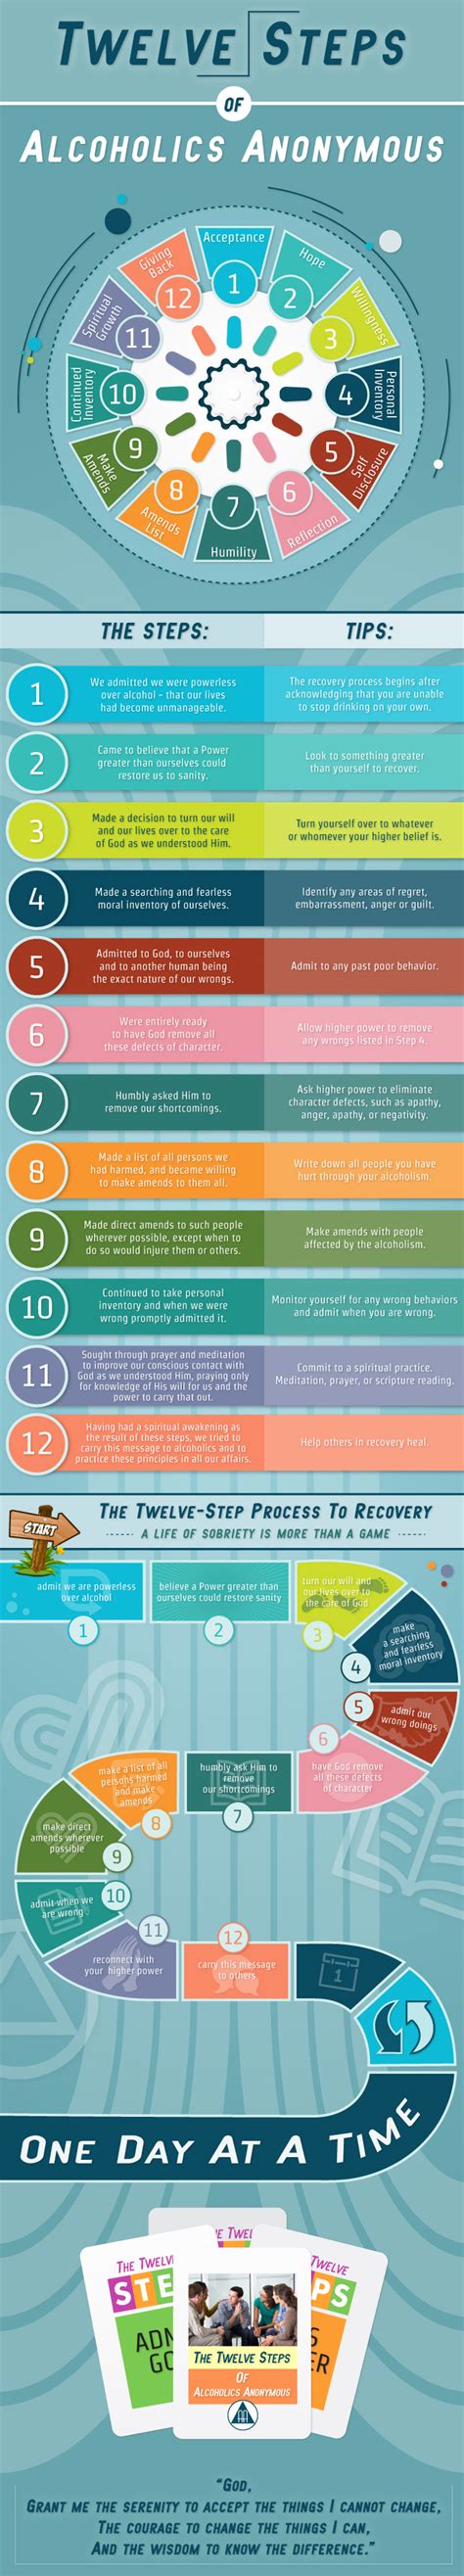 twelve steps of alcoholics anonymous infographic